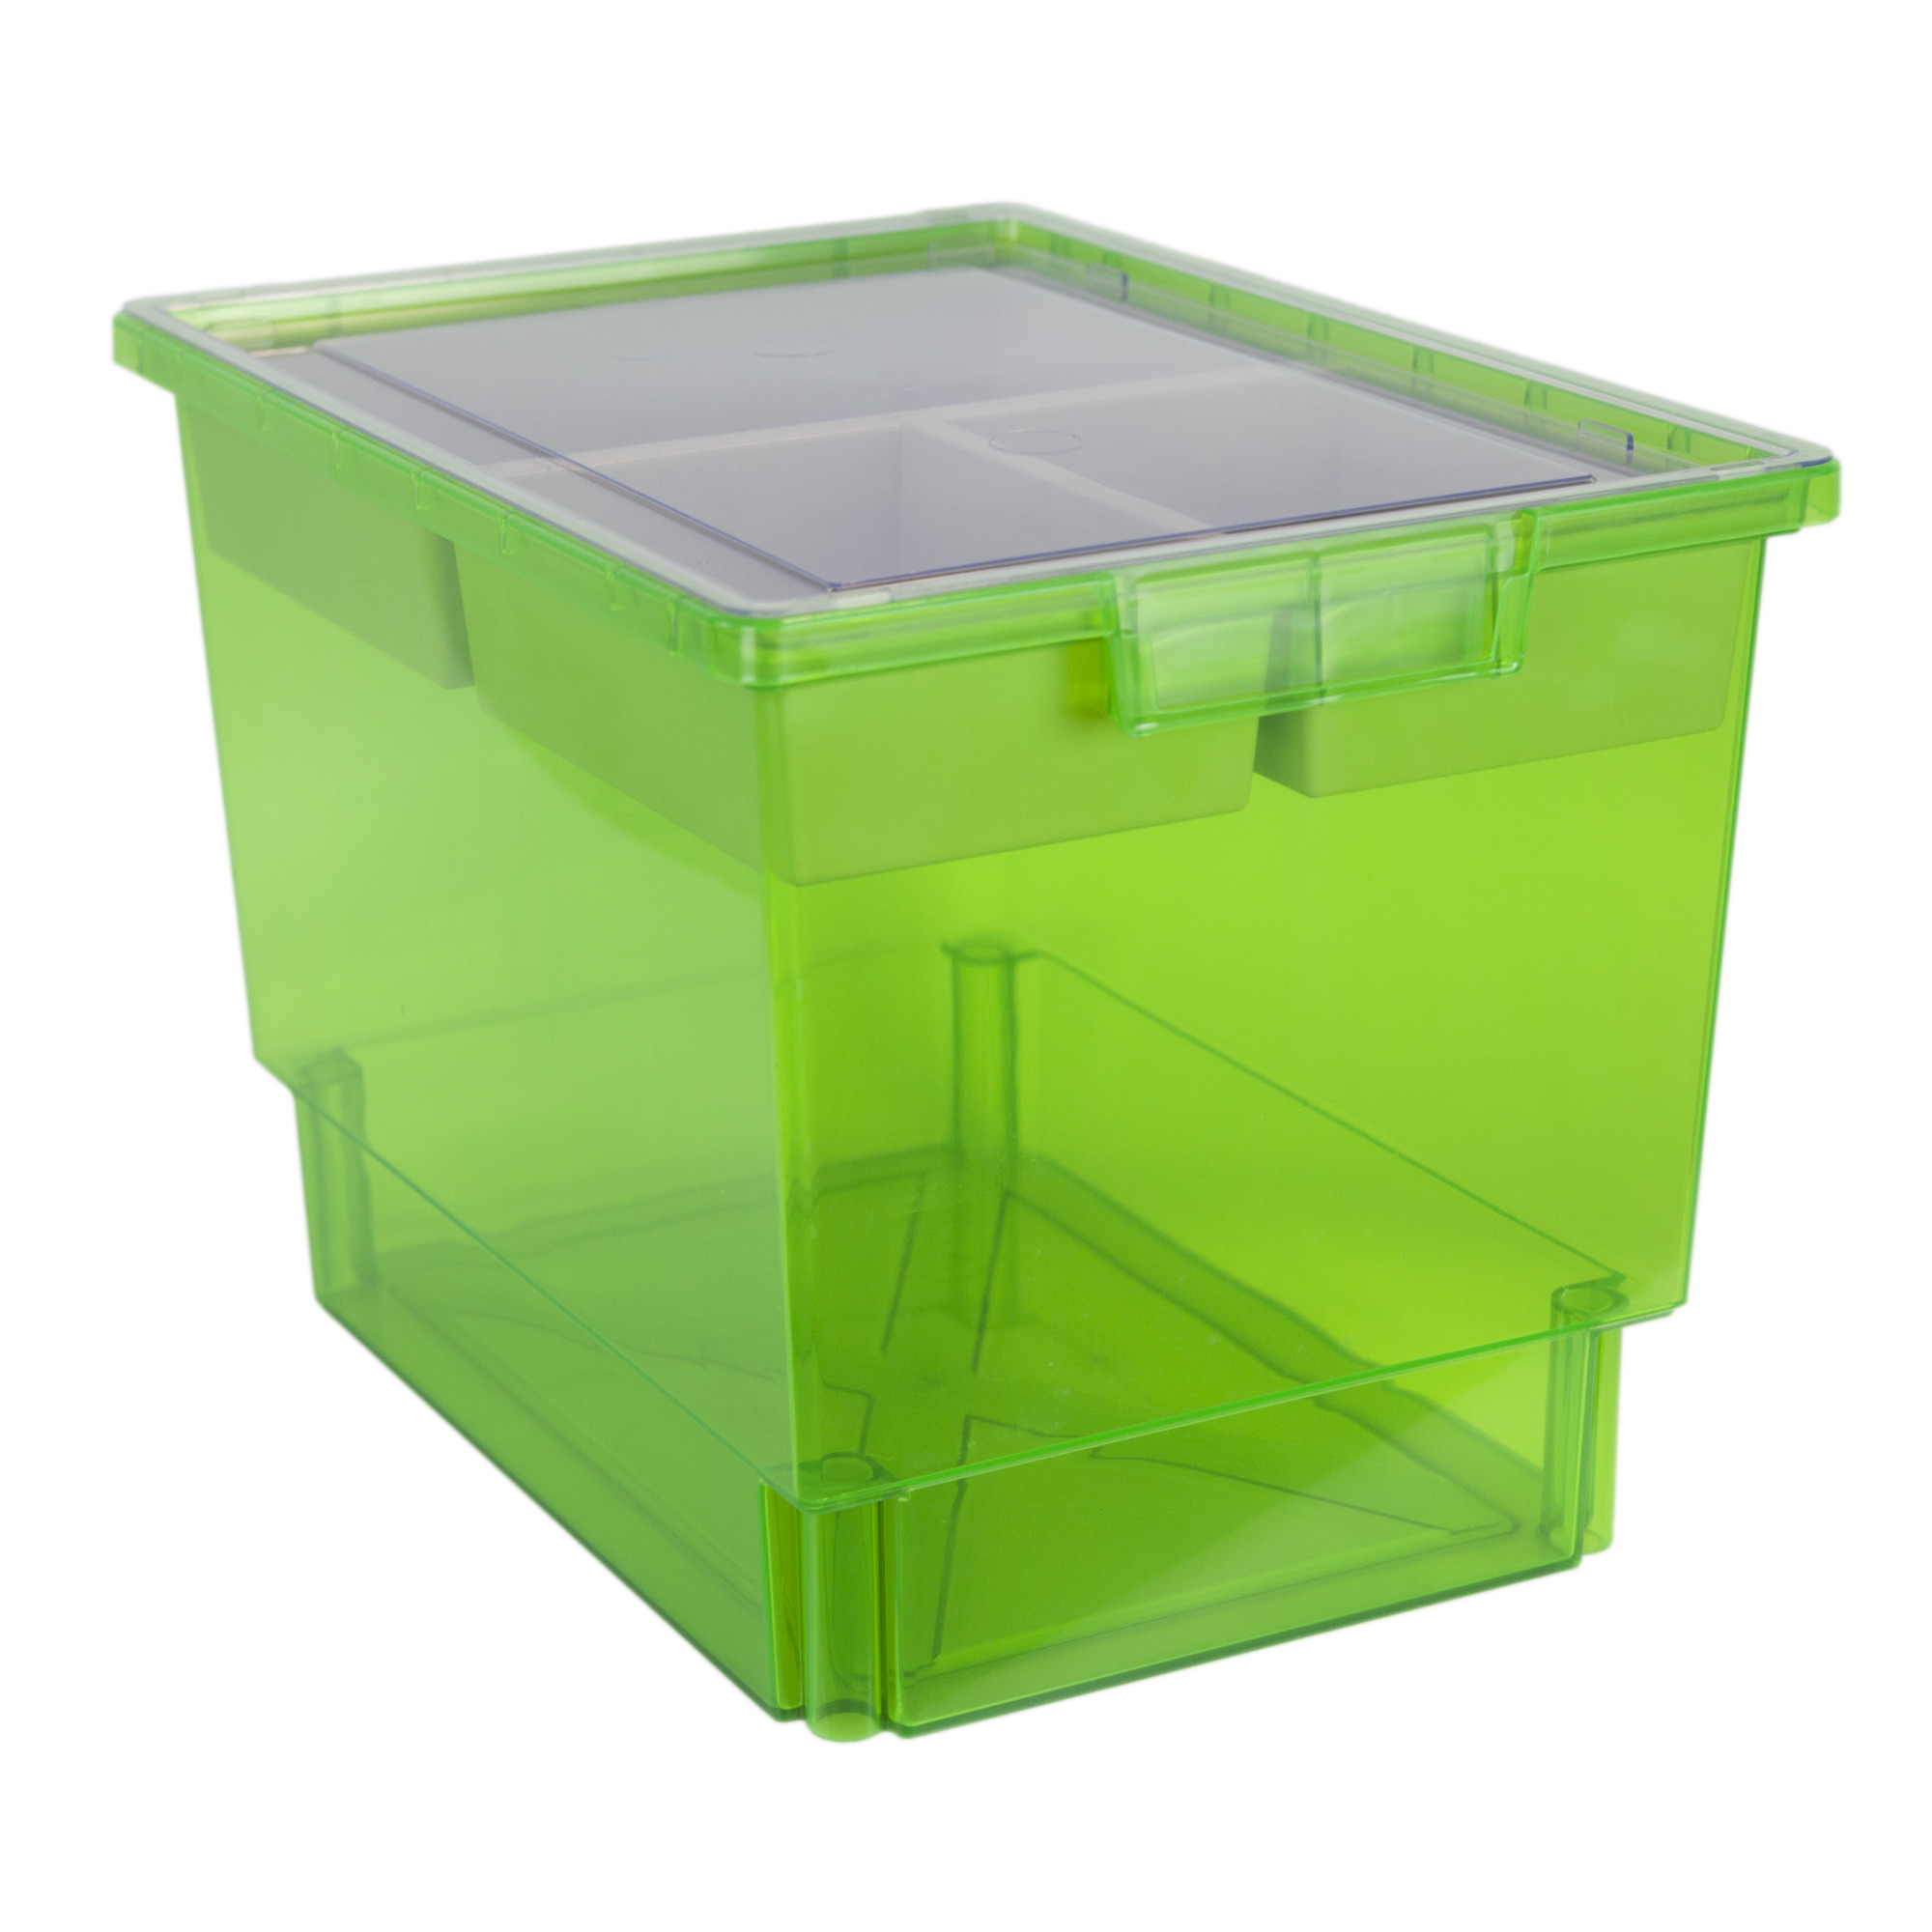 Certwood StorWerks, Slim Line 12Inch Tray Kit (3 x Divisions) Neon Green, Included (qty.) 1, Material Plastic, Height 9 in, Model CE1954FG-NK0004-1